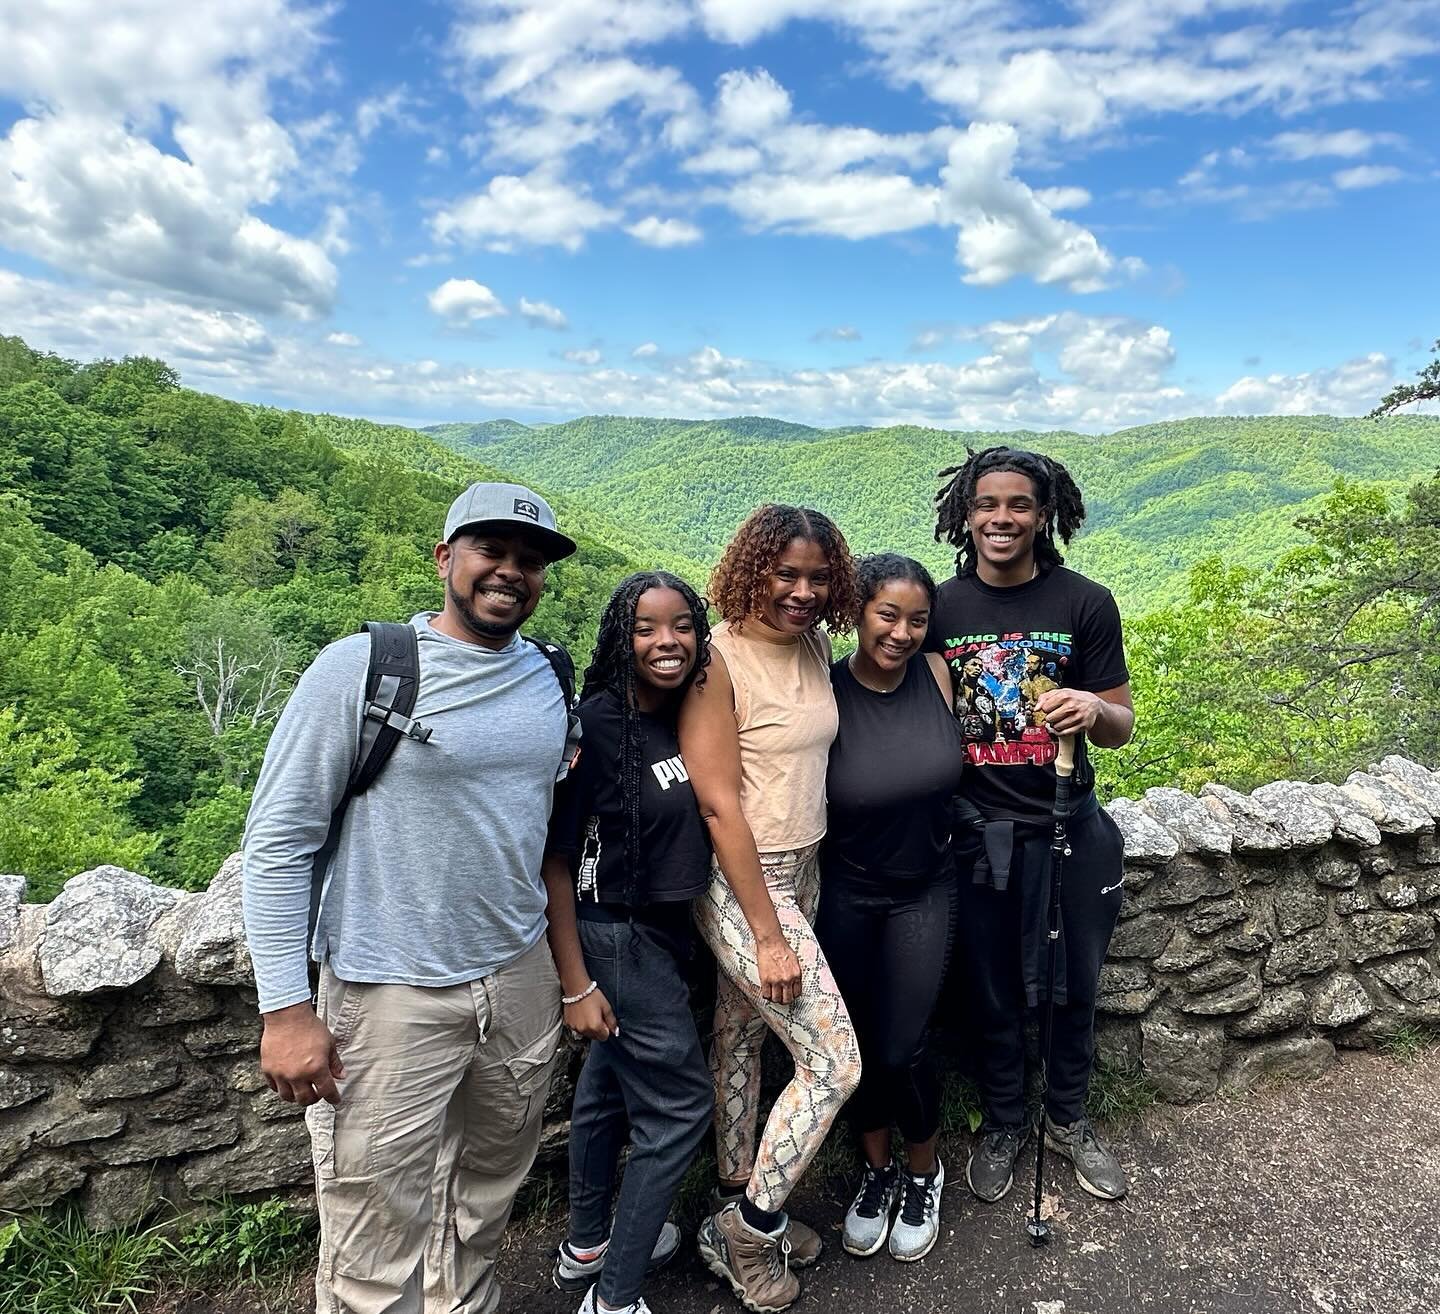 I&rsquo;m so grateful to get live a whole life of being these beautiful children&rsquo;s mama. God did me a solid by allowing them to come through me. #happymothersday #happymoments #hiking #momstyle #blessed #grateful